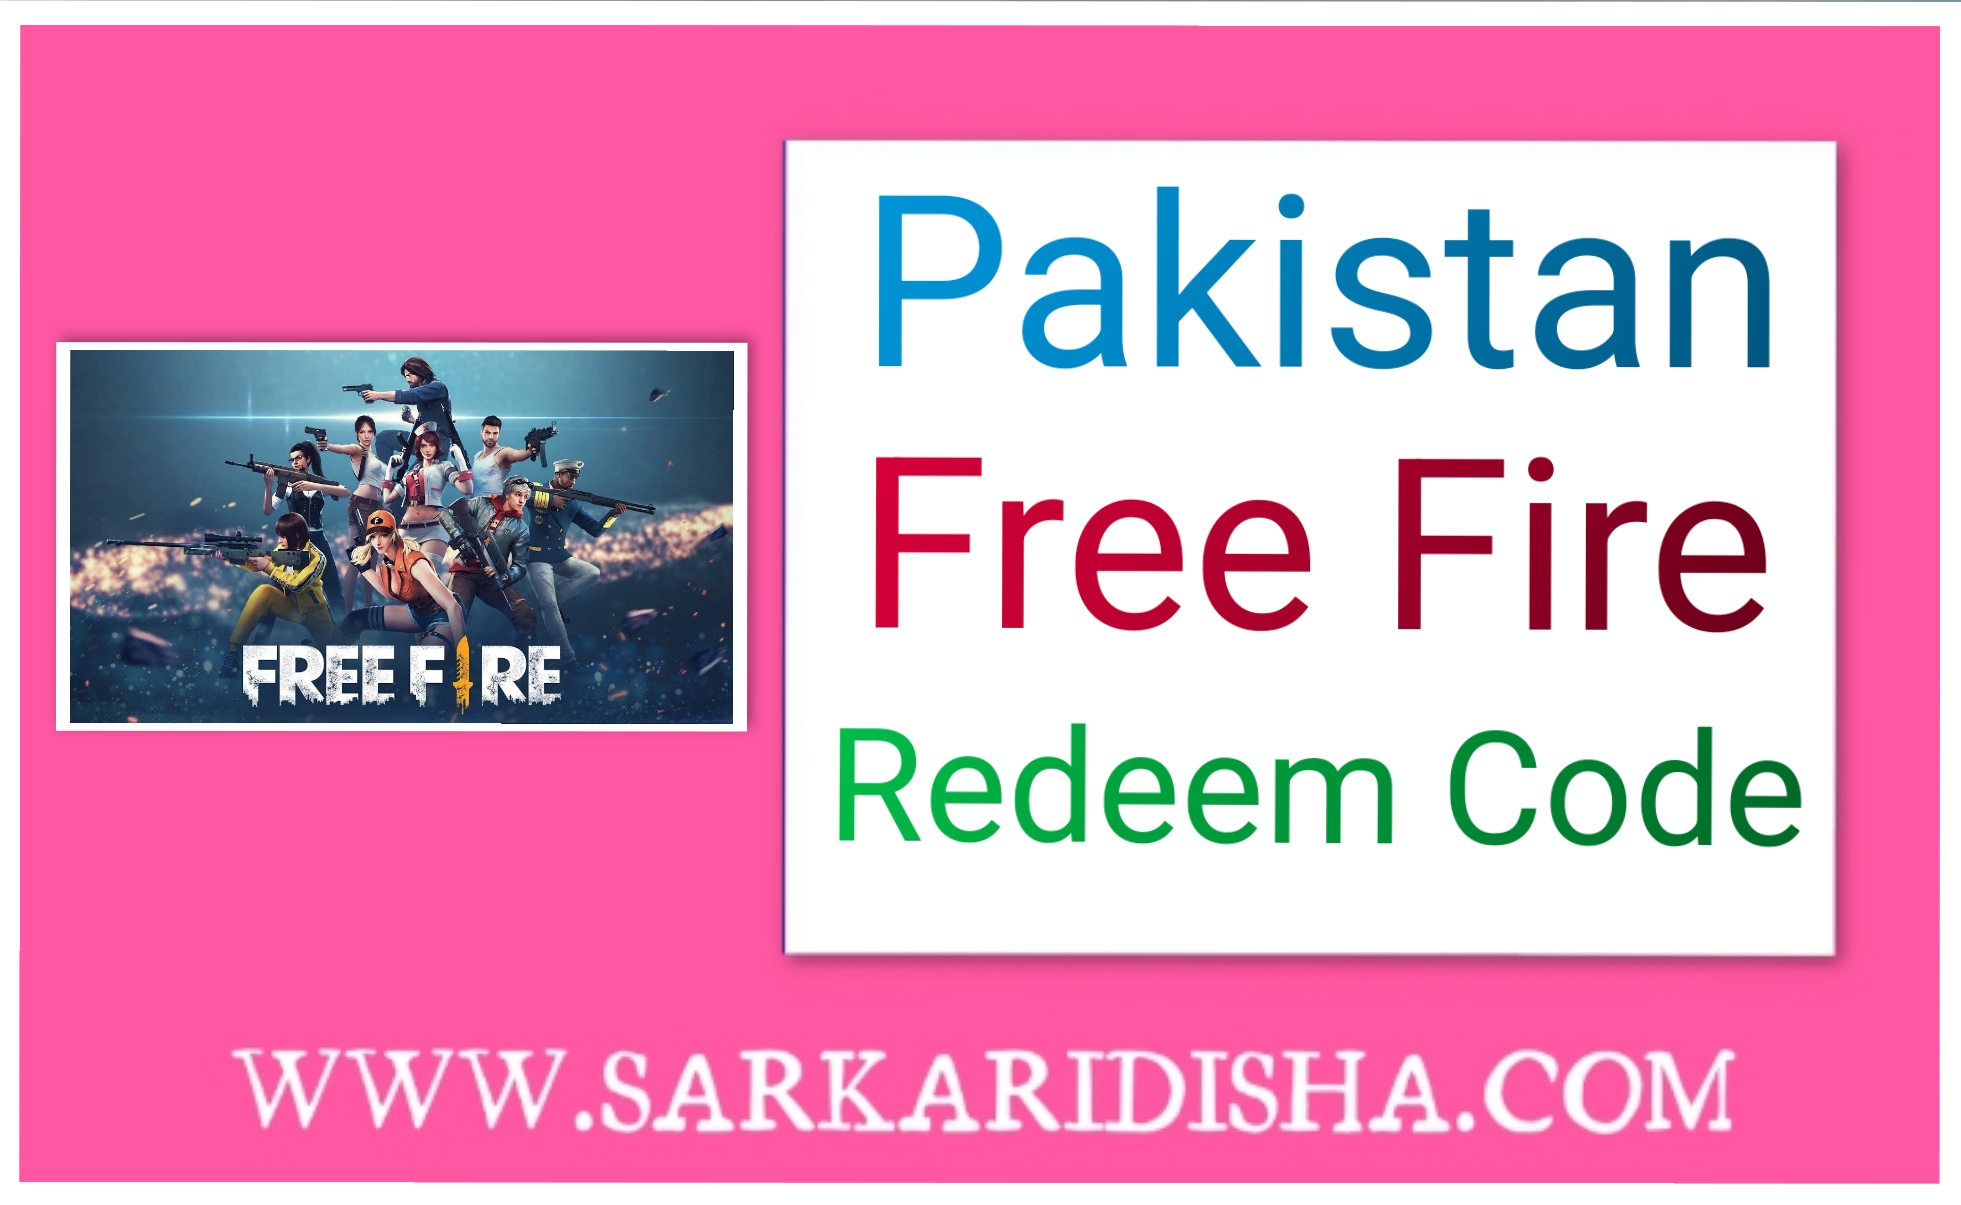 Garena Free Fire MAX Redeem Codes for Today: Check reward.ff.garena.com for  Redeem Codes List; Know How To Win Rewards and Weapons on 20 December 2022